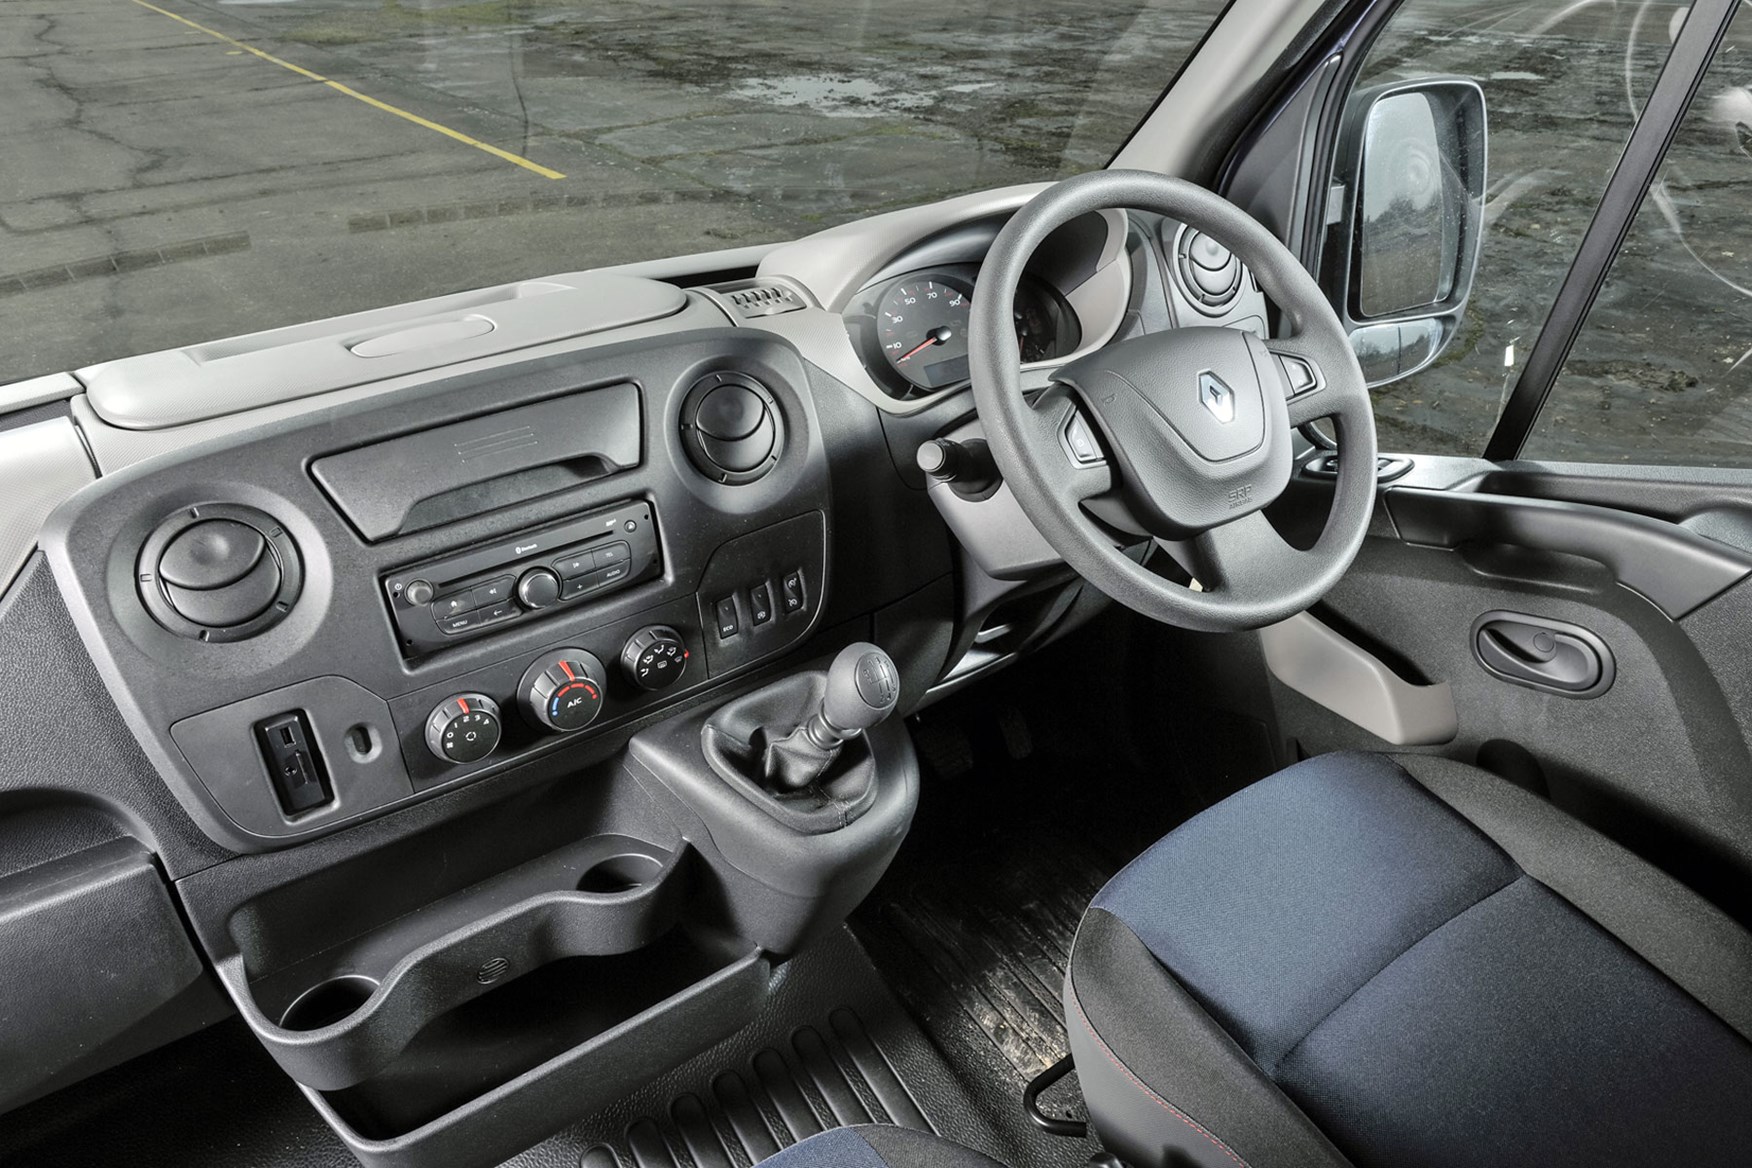 Renault Master review - 2016 model cab interior showing dashboard, steering wheel and storage